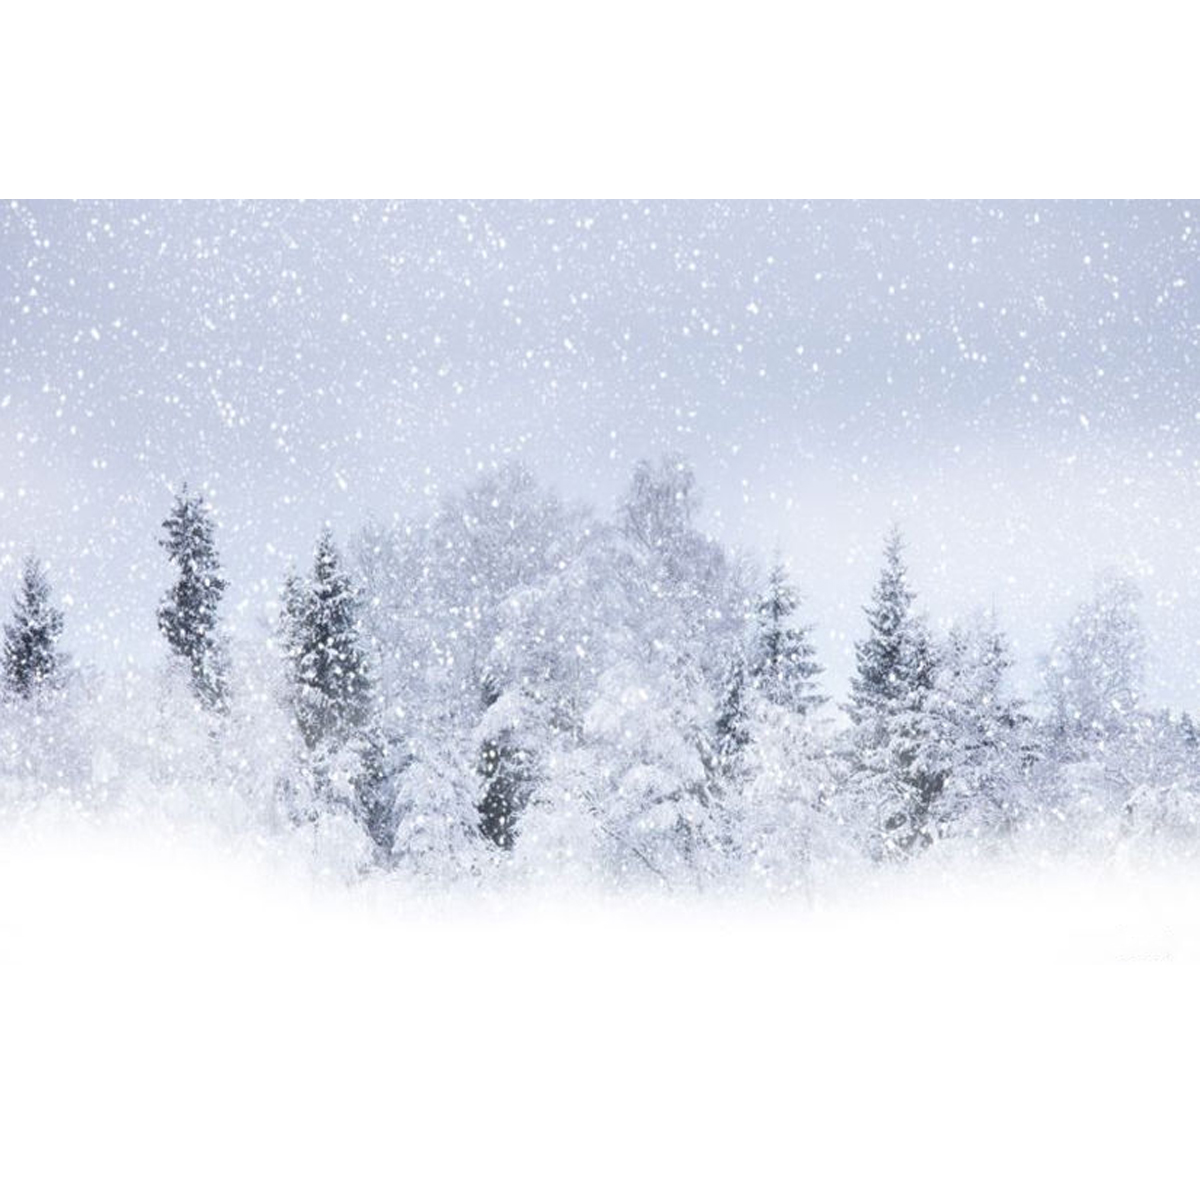 2.1x1.5m Snow Covered Forest Snow Covered Photographic Background